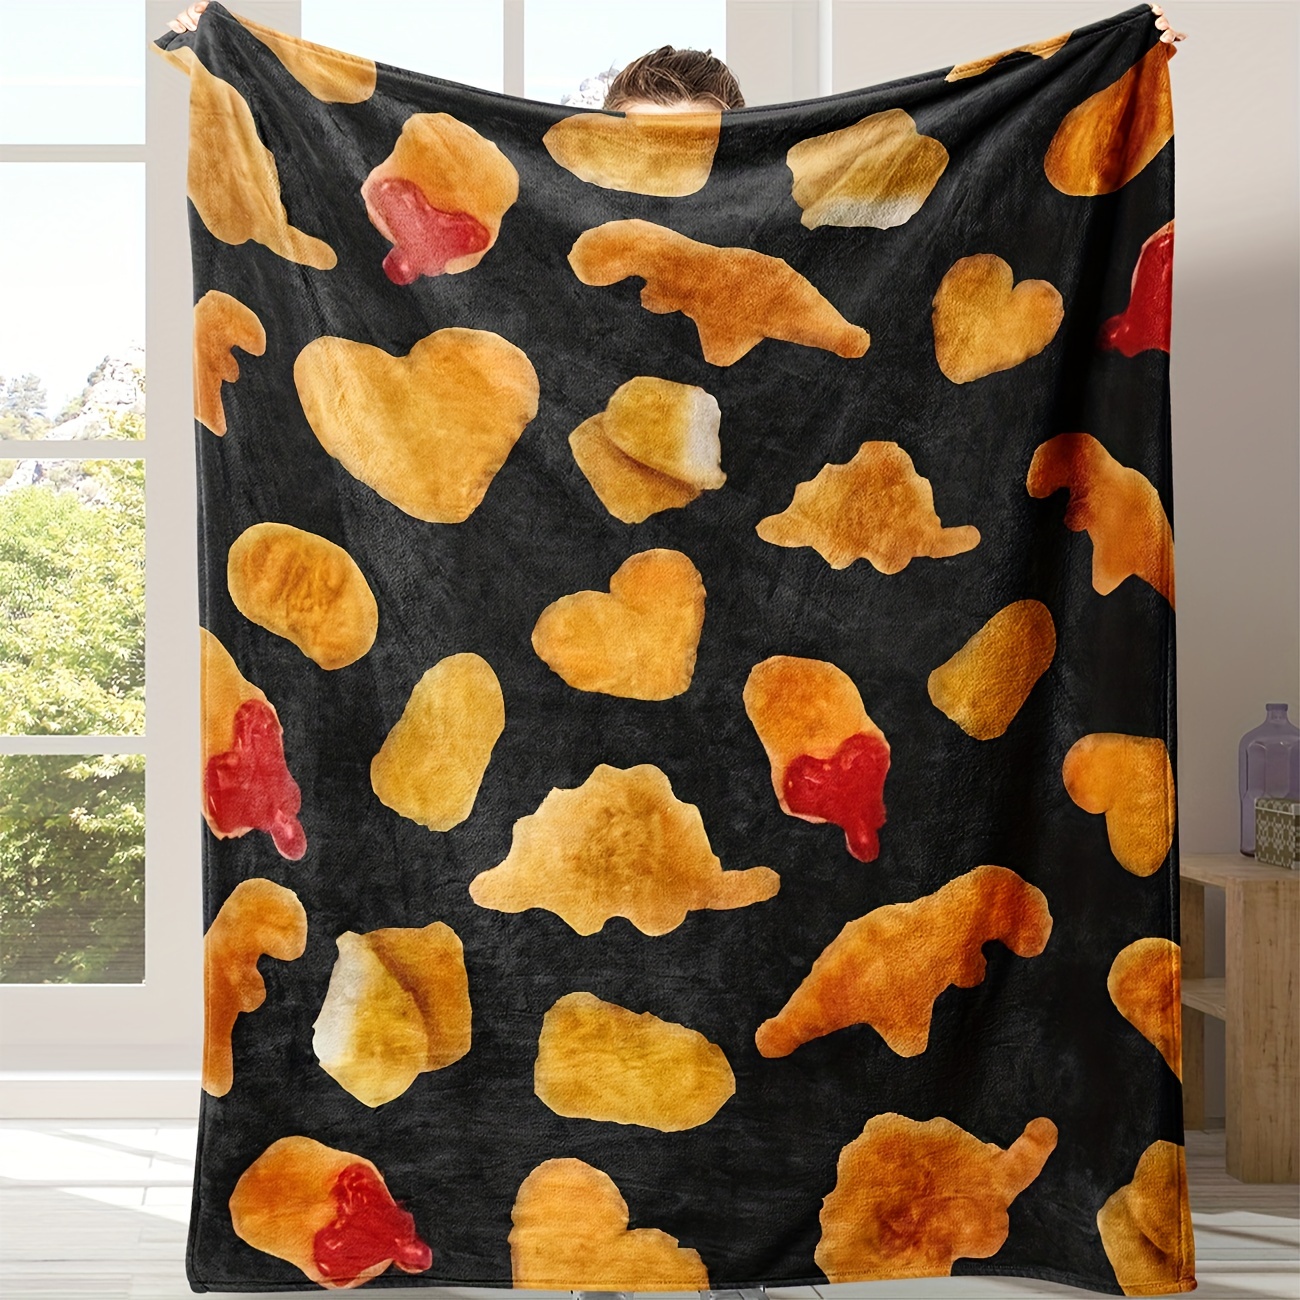 

1pc Chicken Block Pattern Flannel Blanket Lunch Break Blanket Warm Cozy Soft Blanket For Sofa Gift Home Comfortable Lightweight Blanket Travel Camping Living Room Office Sofa Chair Bed Flannel Blanket